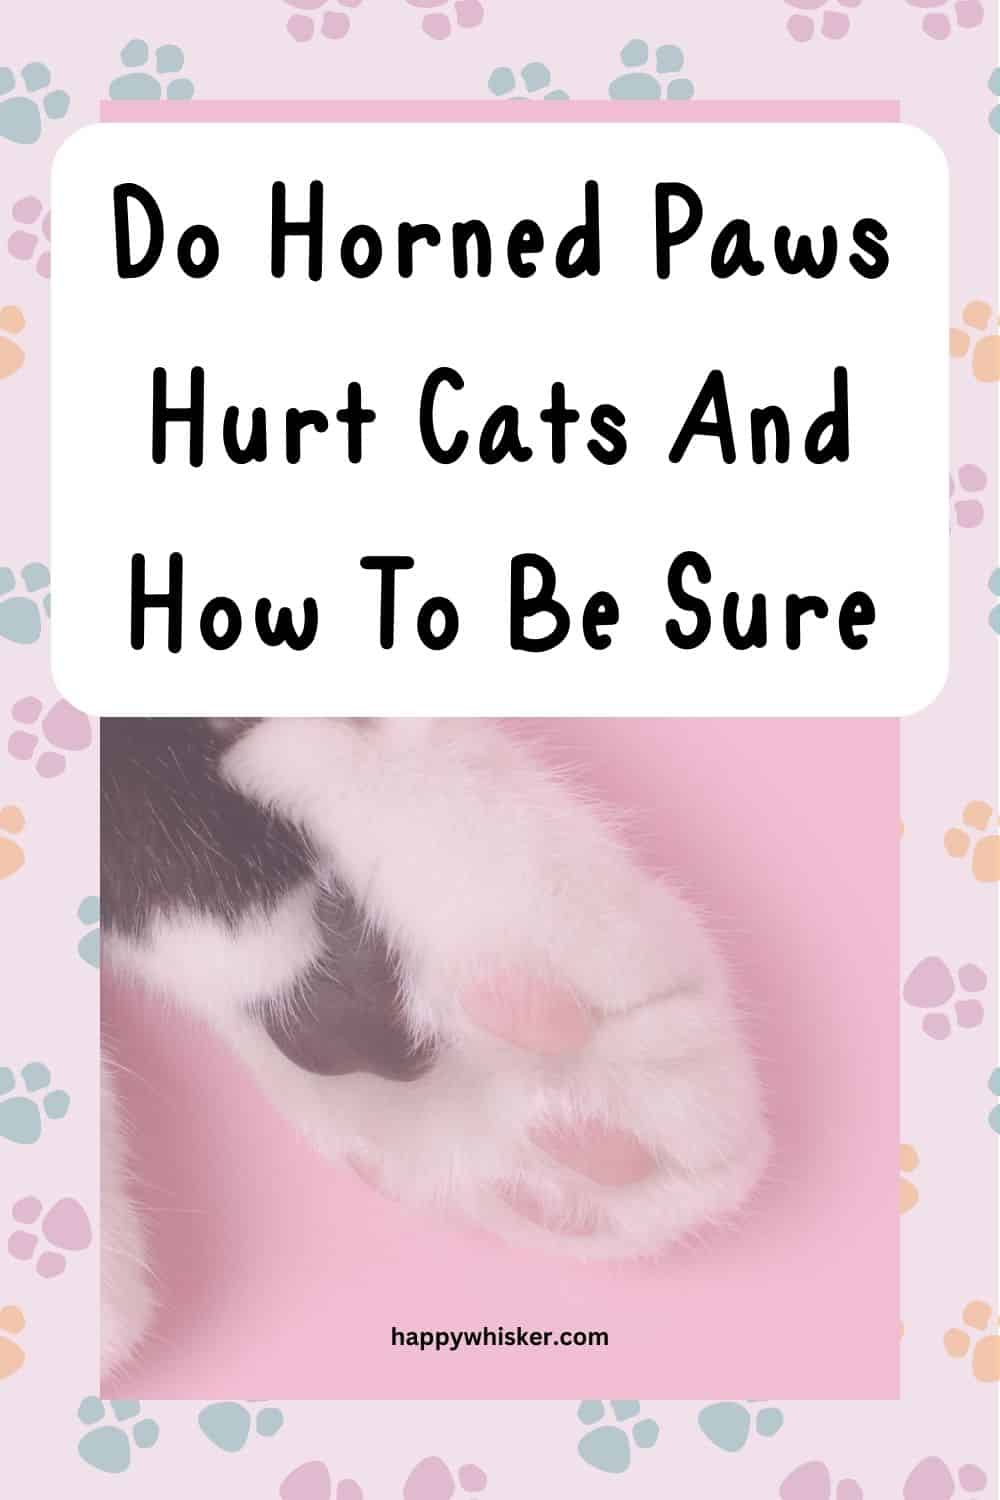 Do Horned Paws Hurt Cats And How To Be Sure Pinterest